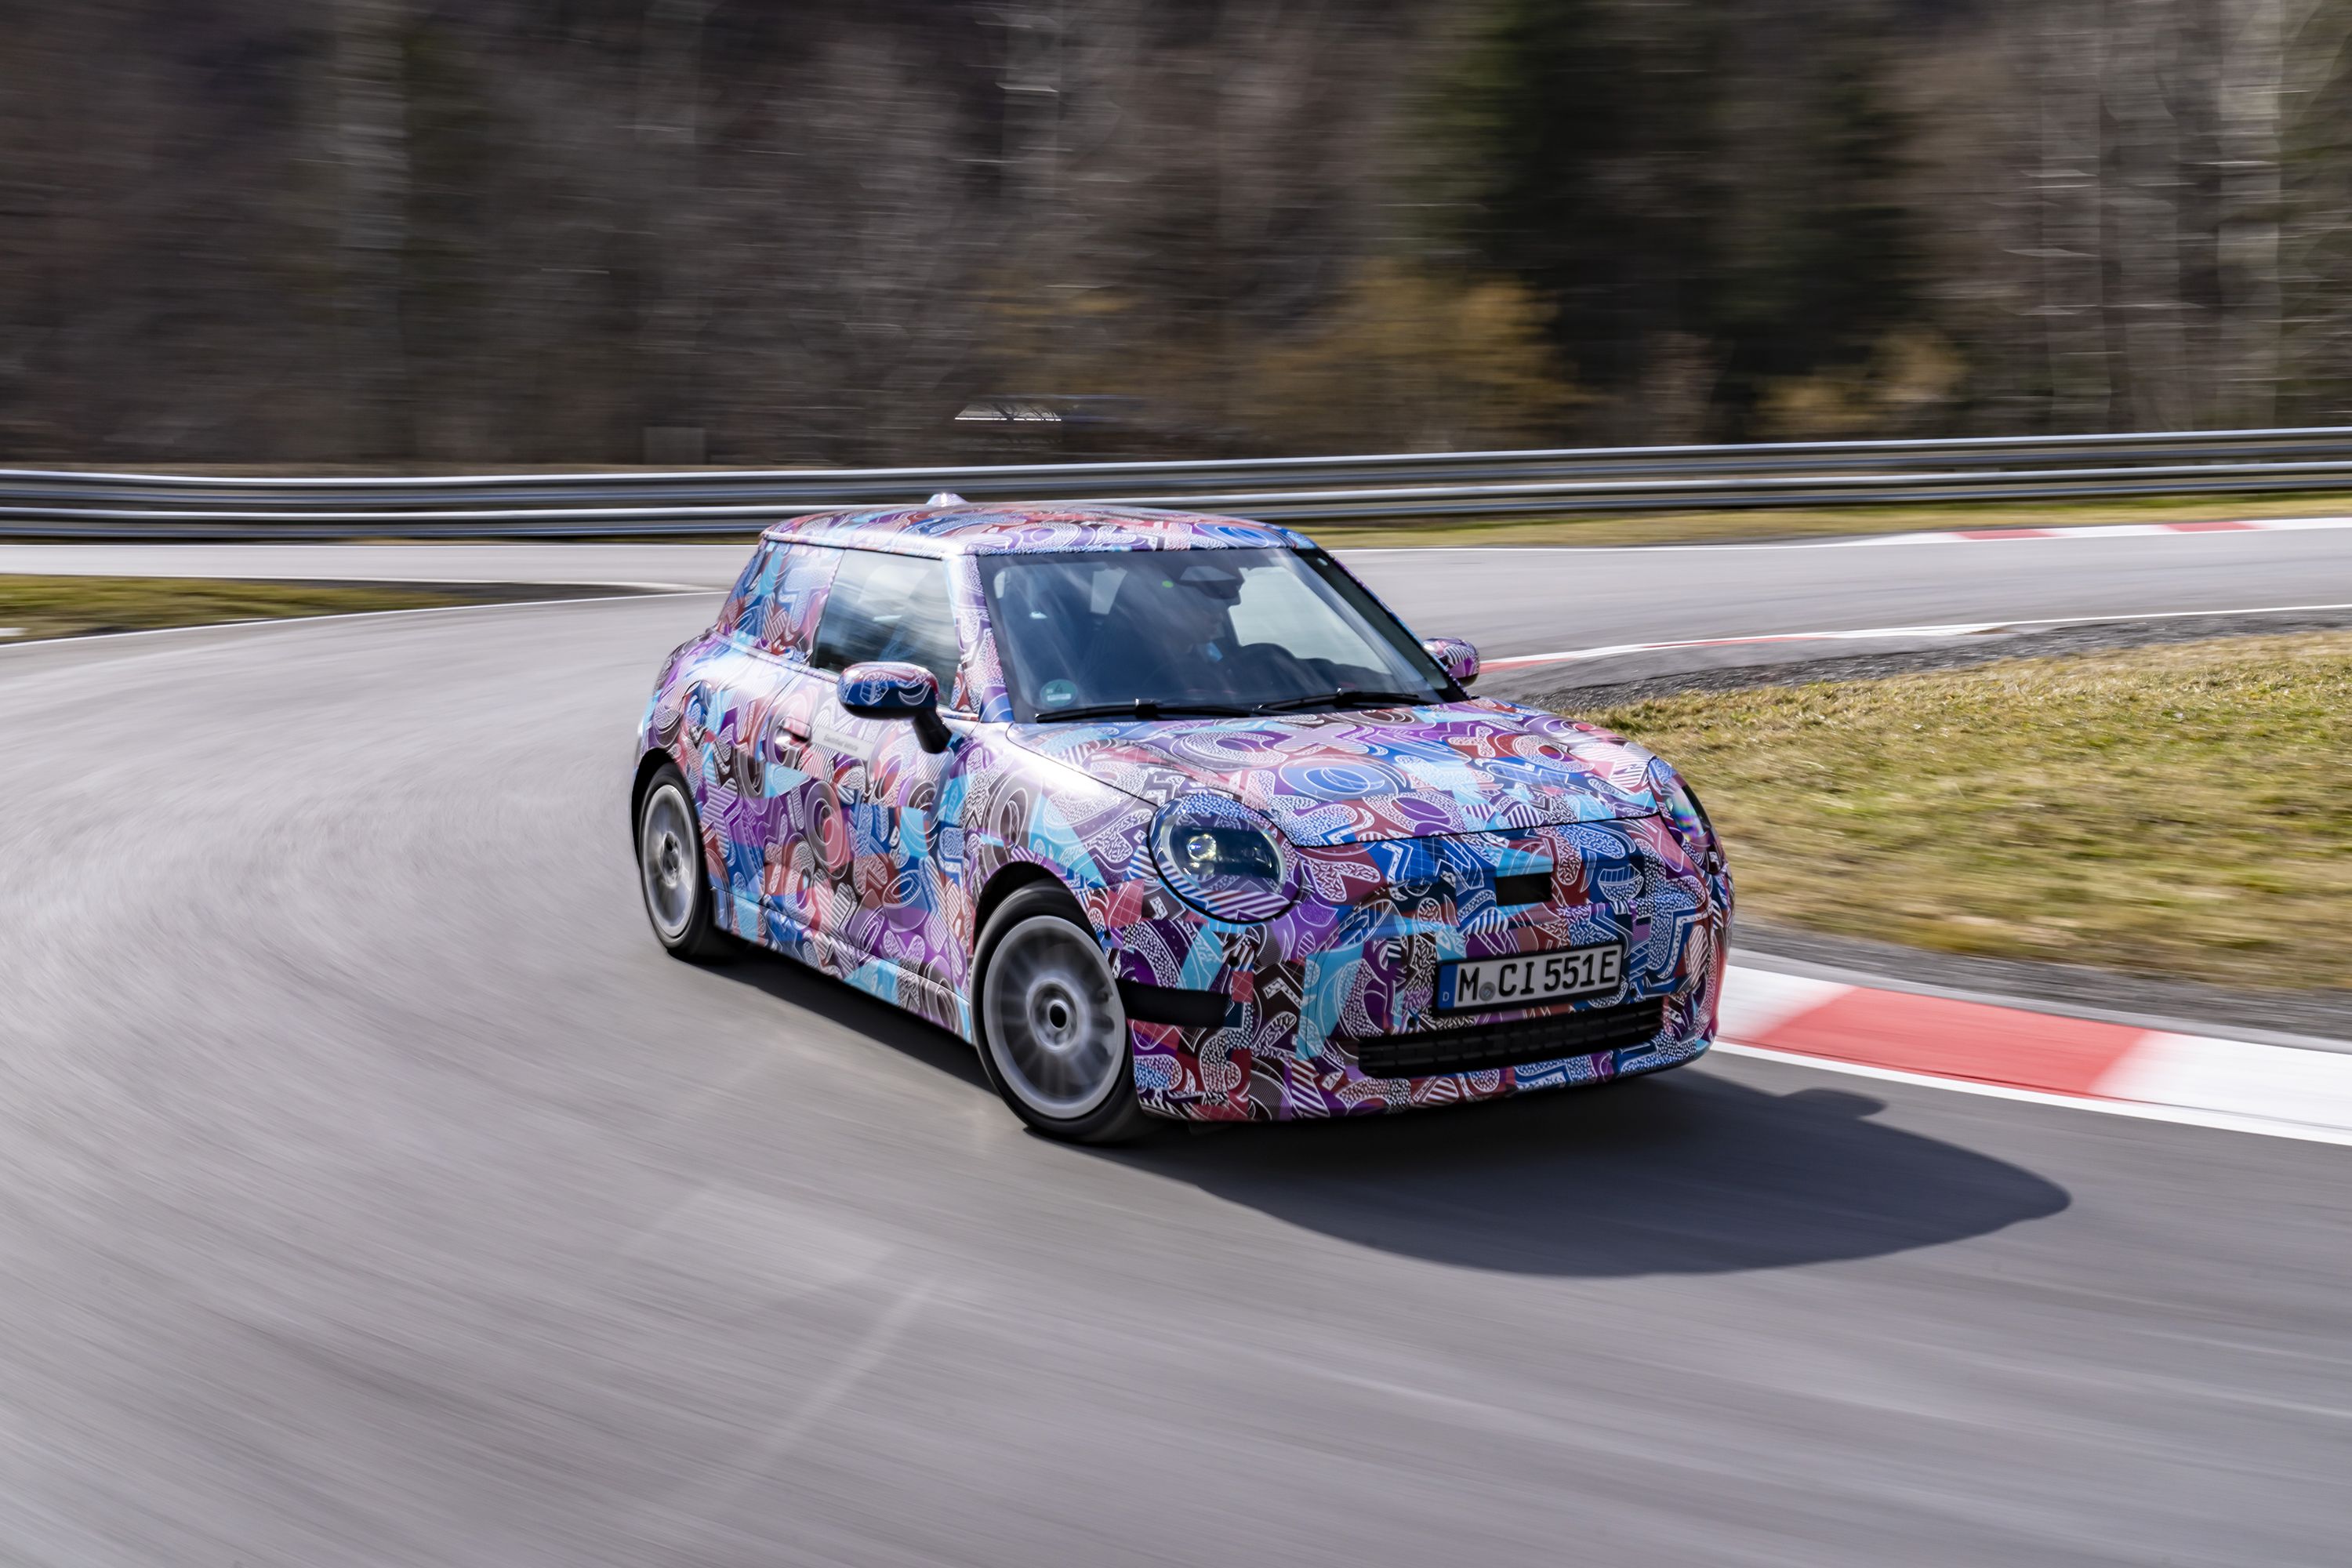 Mini Countryman SUV Is Revitalized as an EV with Sharper Styling